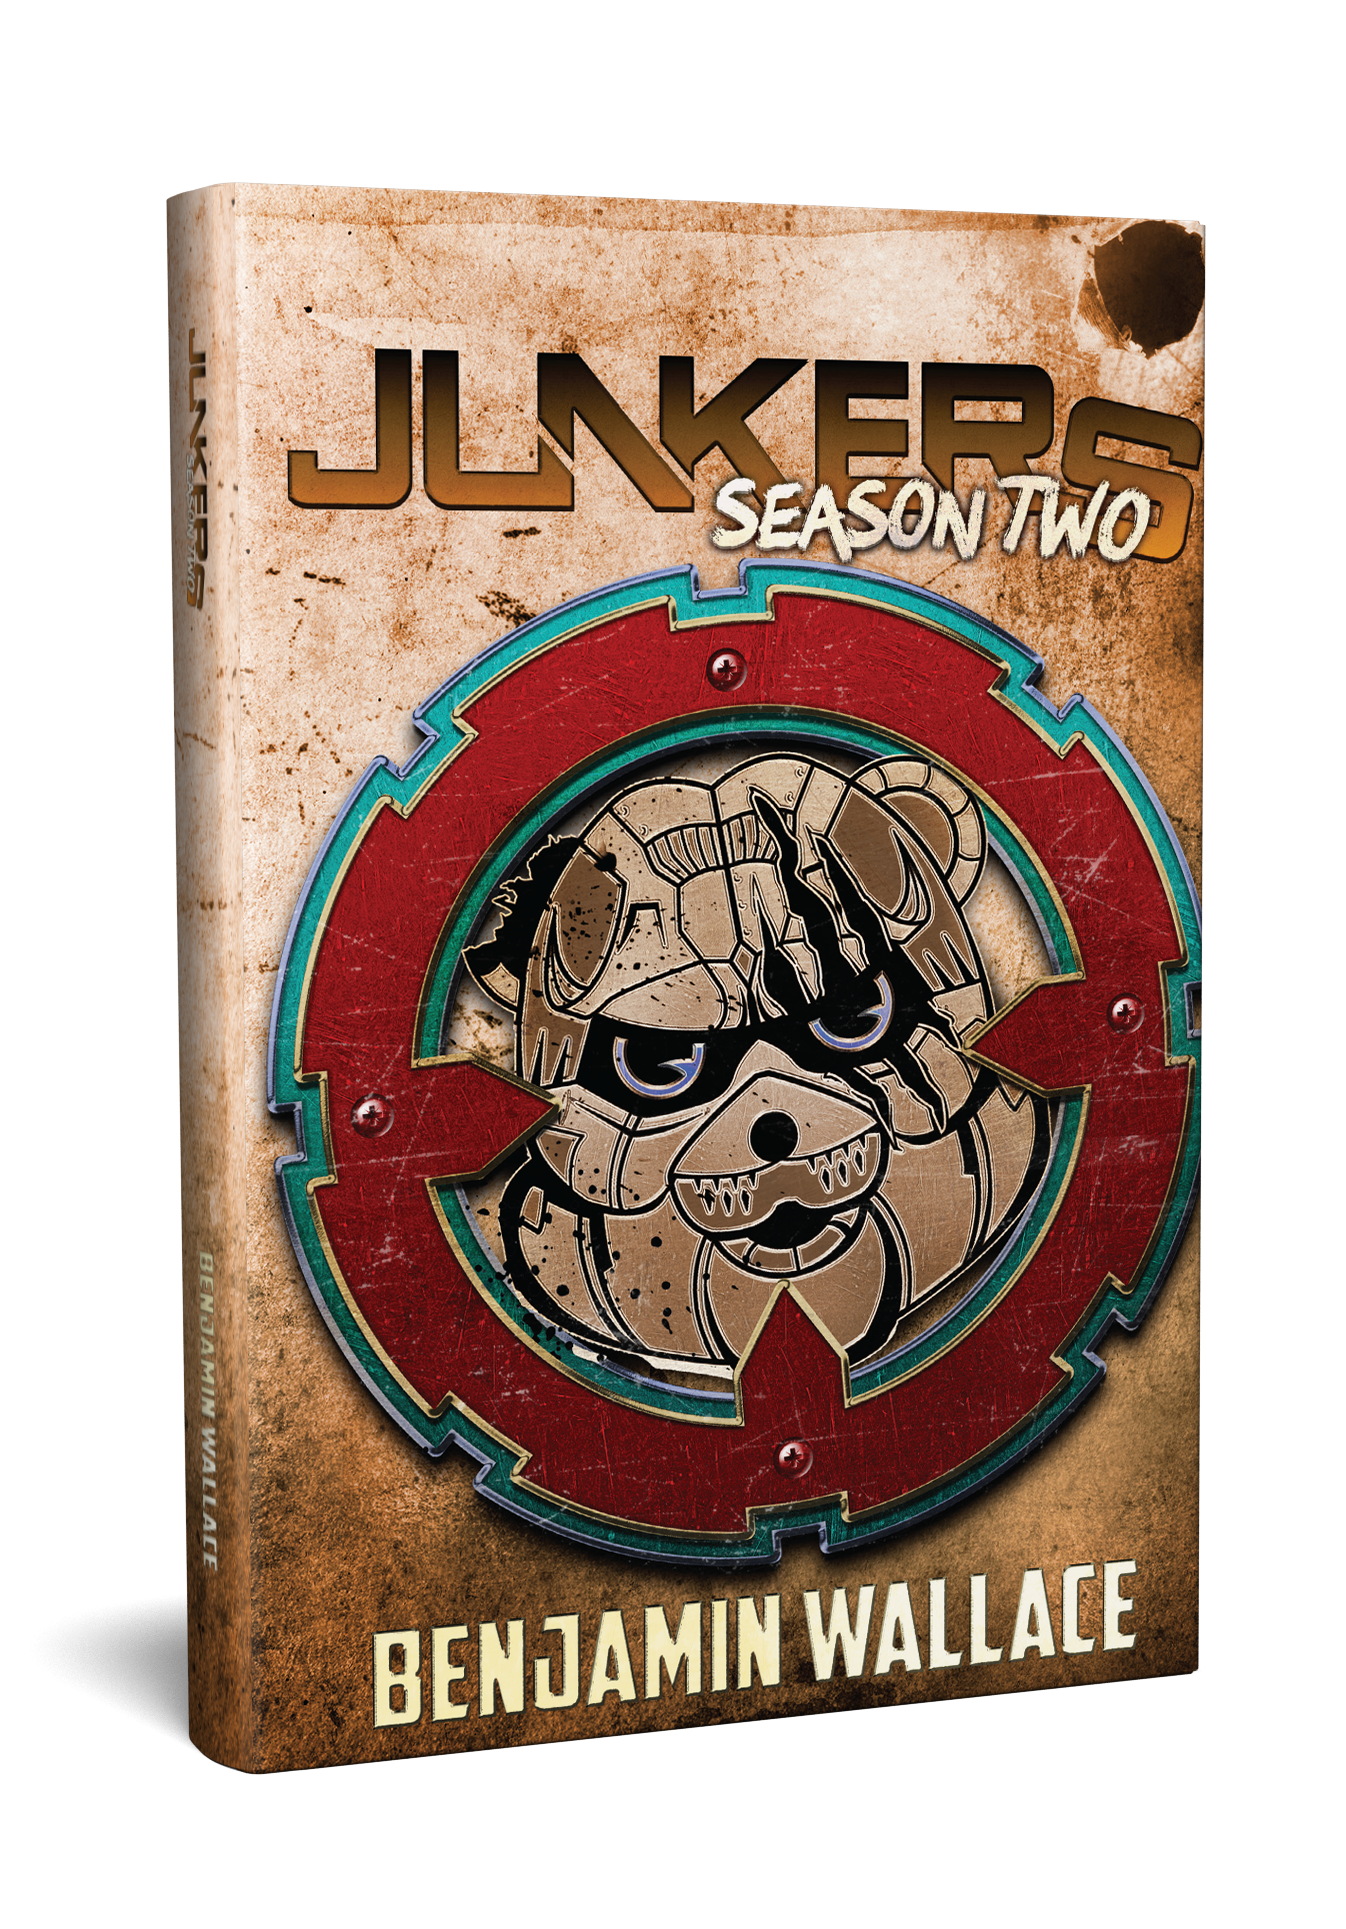 Junkers, Season Two - Book 2 (Legacy Cover Paperback)